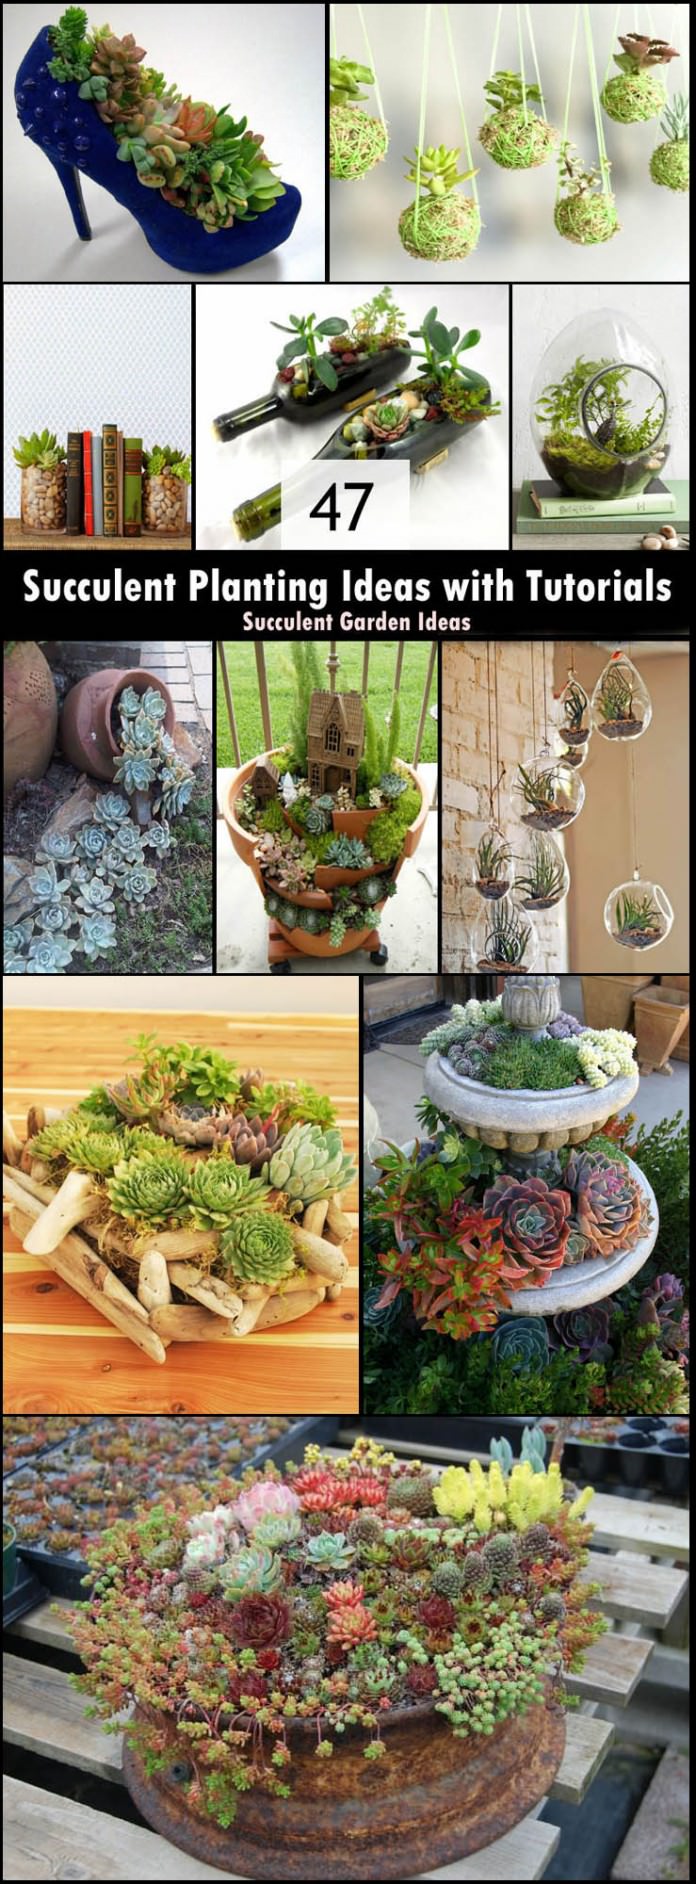 Whether you want to grow succulents indoors or outdoors these unique succulent planting ideas will interest you for sure!